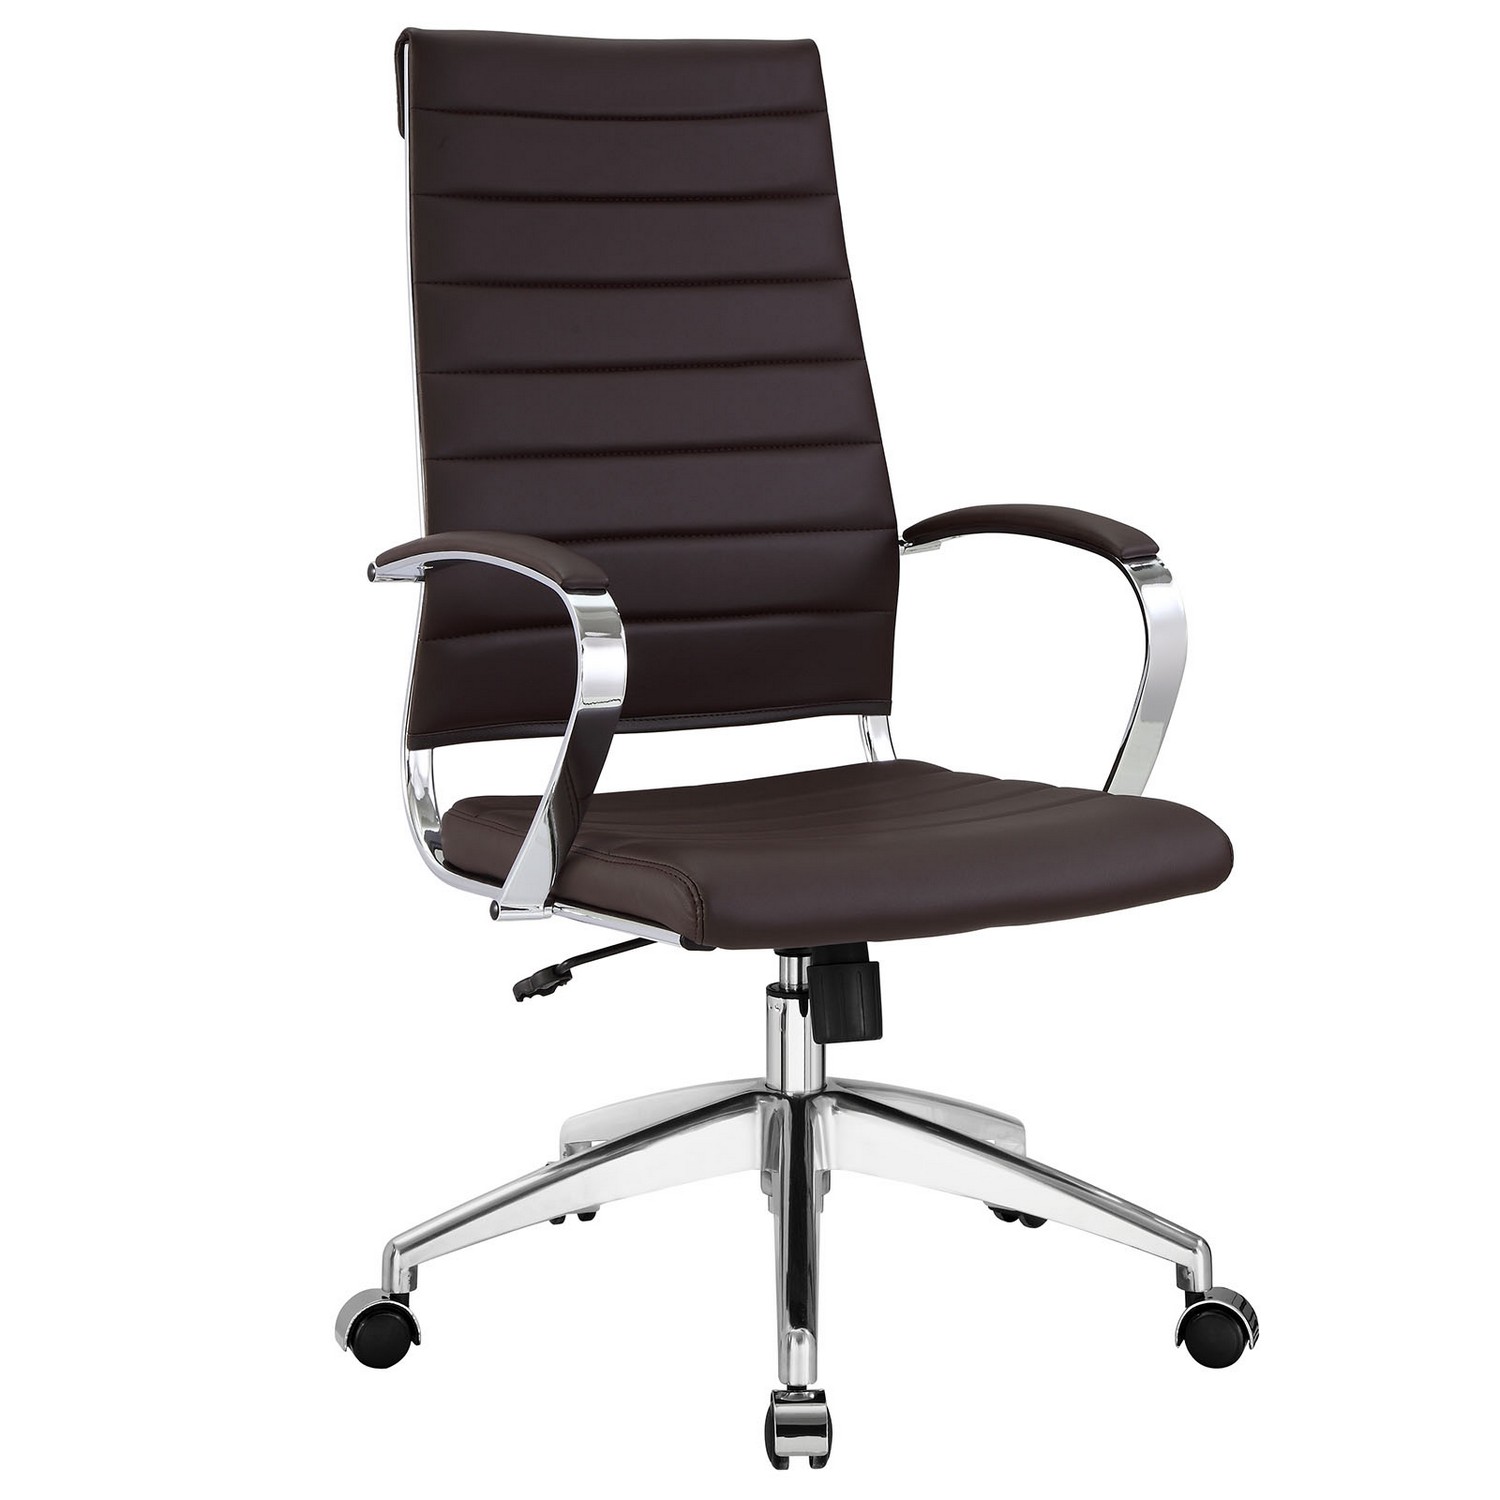 Modway Jive Highback Office Chair - Brown